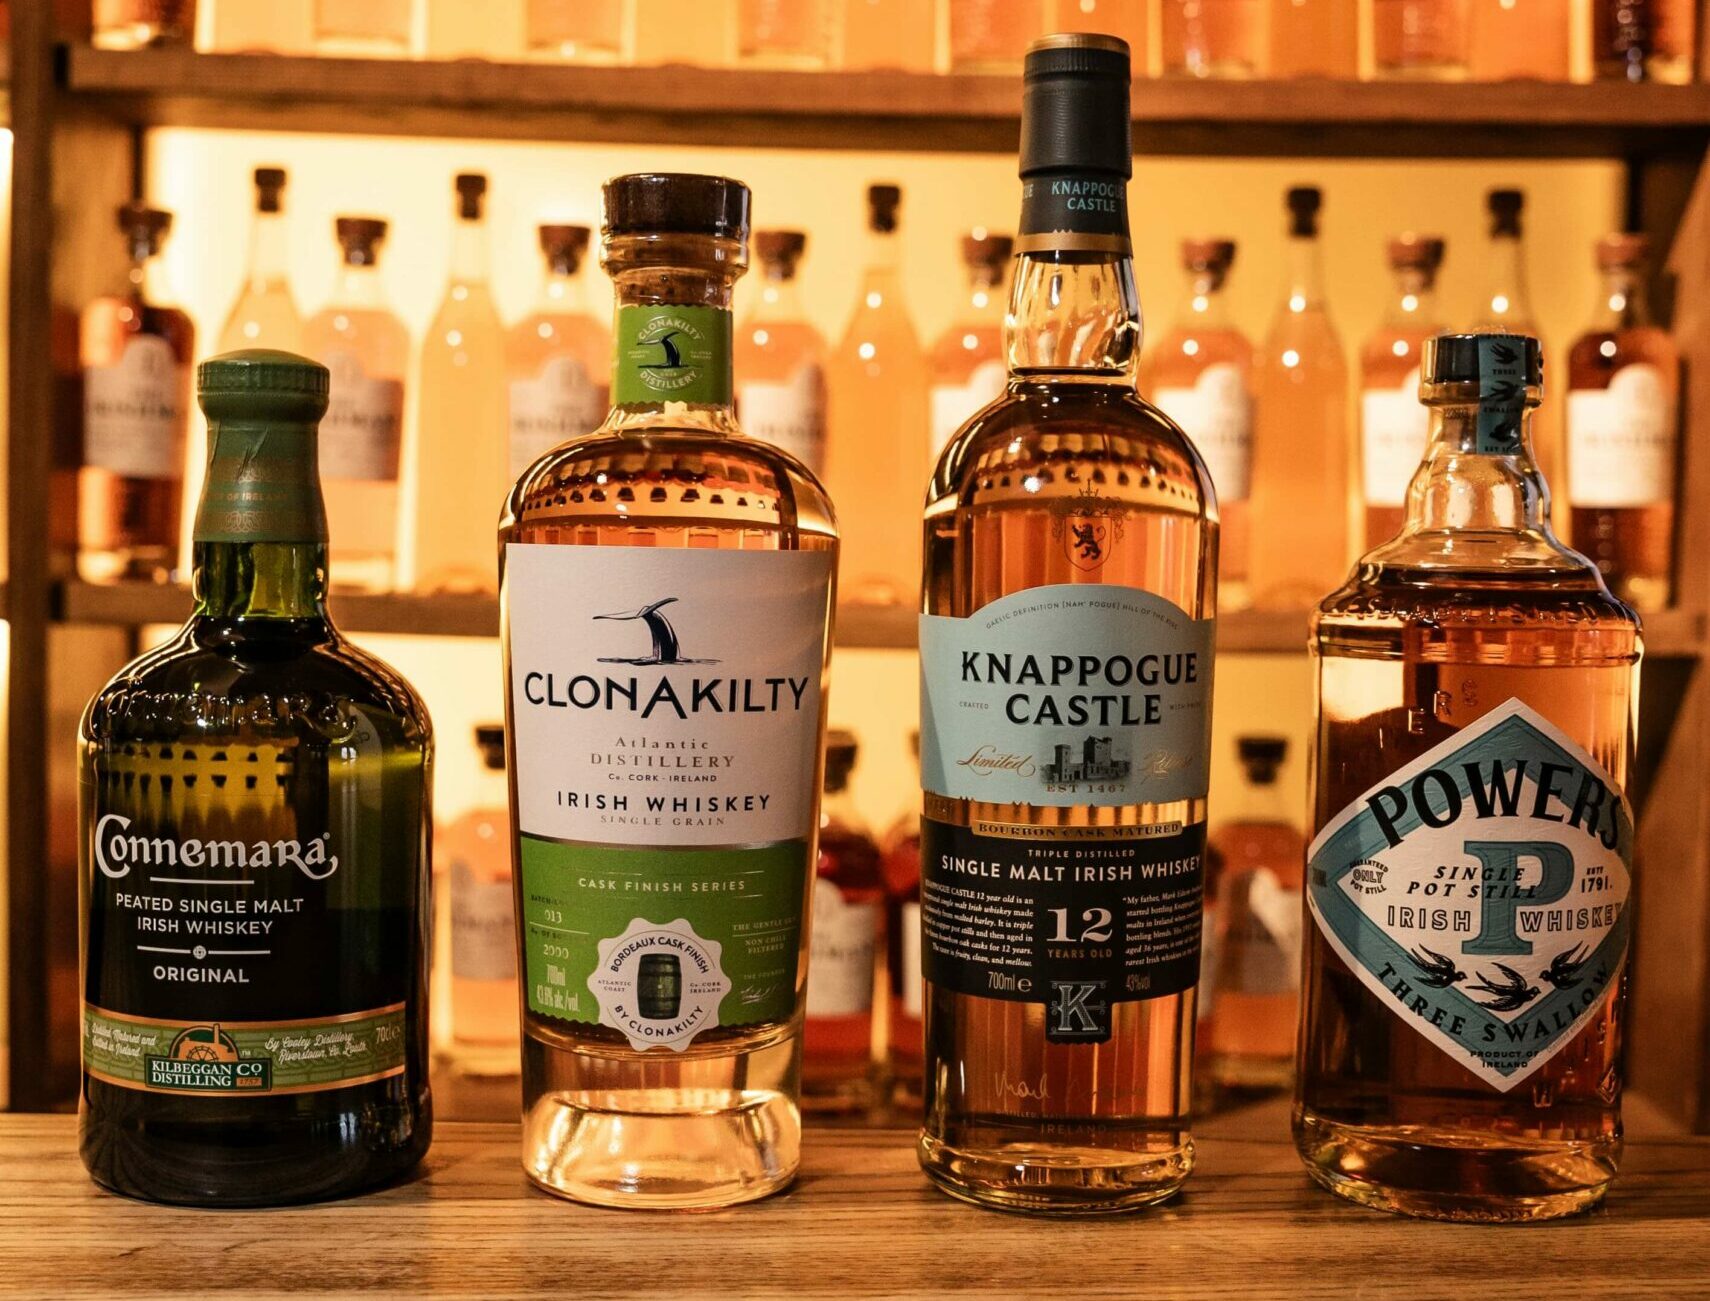 A Spirited Debate: Who Invented Whiskey – The Irish or the Scots?